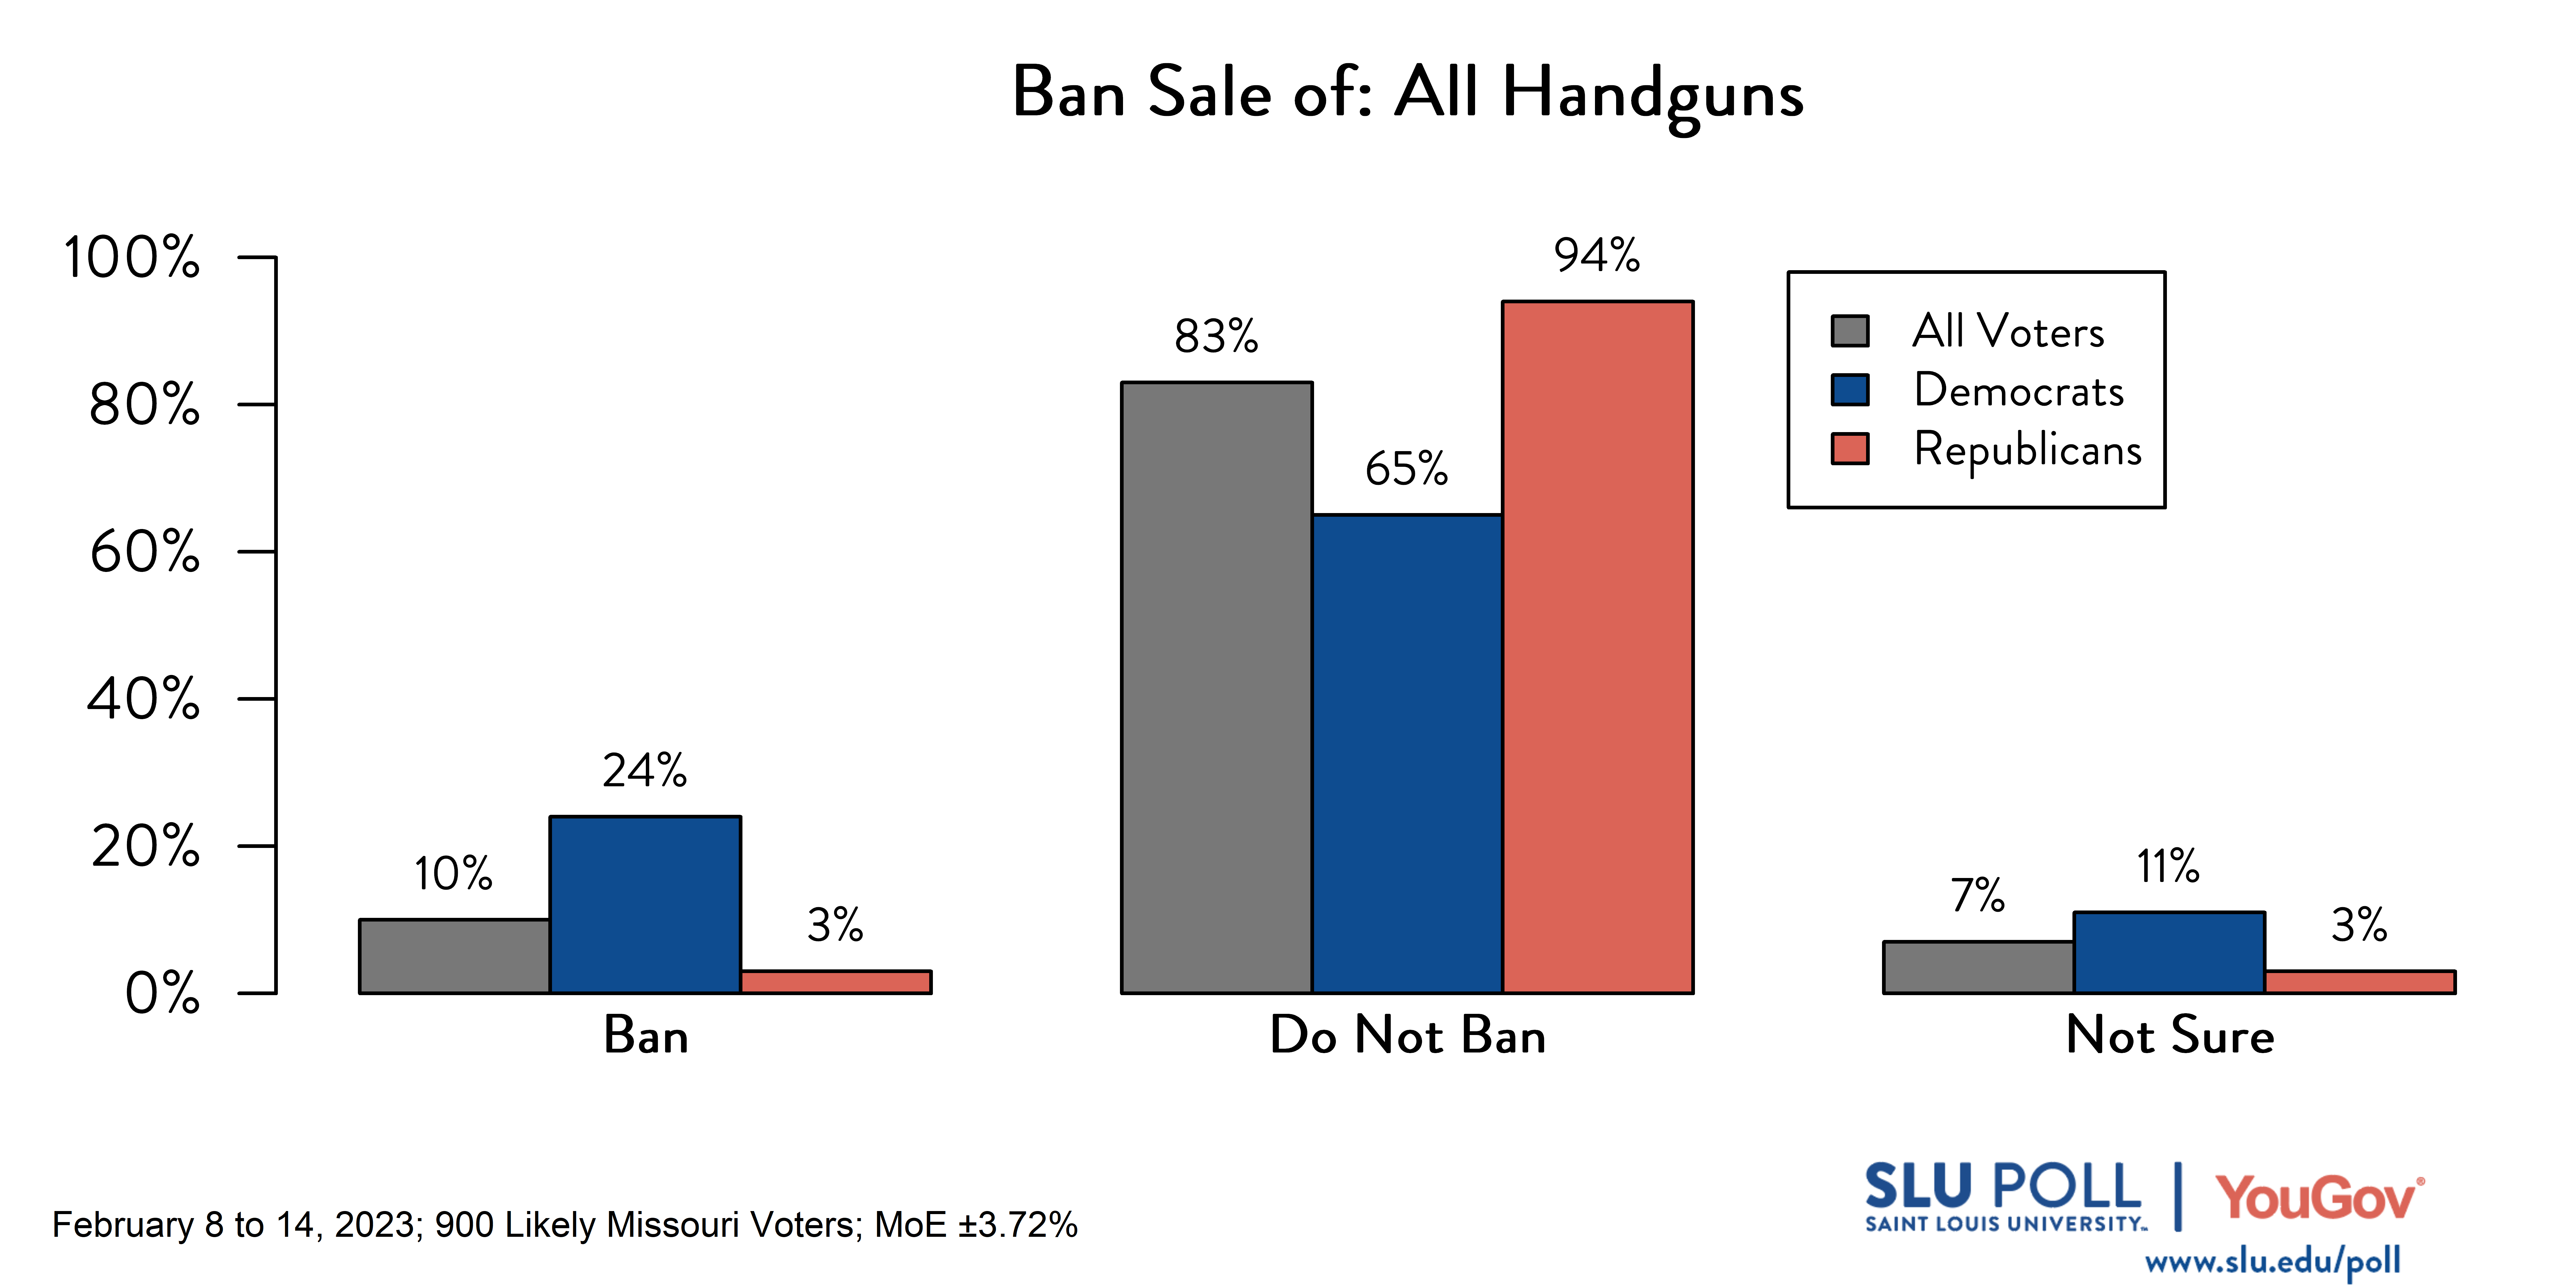 Likely voters' responses to 'Do you support banning the following gun-related sales, except those that are issued to law enforcement officers: The sale of all handguns?': 10% Ban, 83% Do not ban, and 7% Not sure. Democratic voters' responses: ' 24% Ban, 65% Do not ban, and 11% Not sure. Republican voters' responses: 3% Ban, 94% Do not ban, and 3% Not sure.